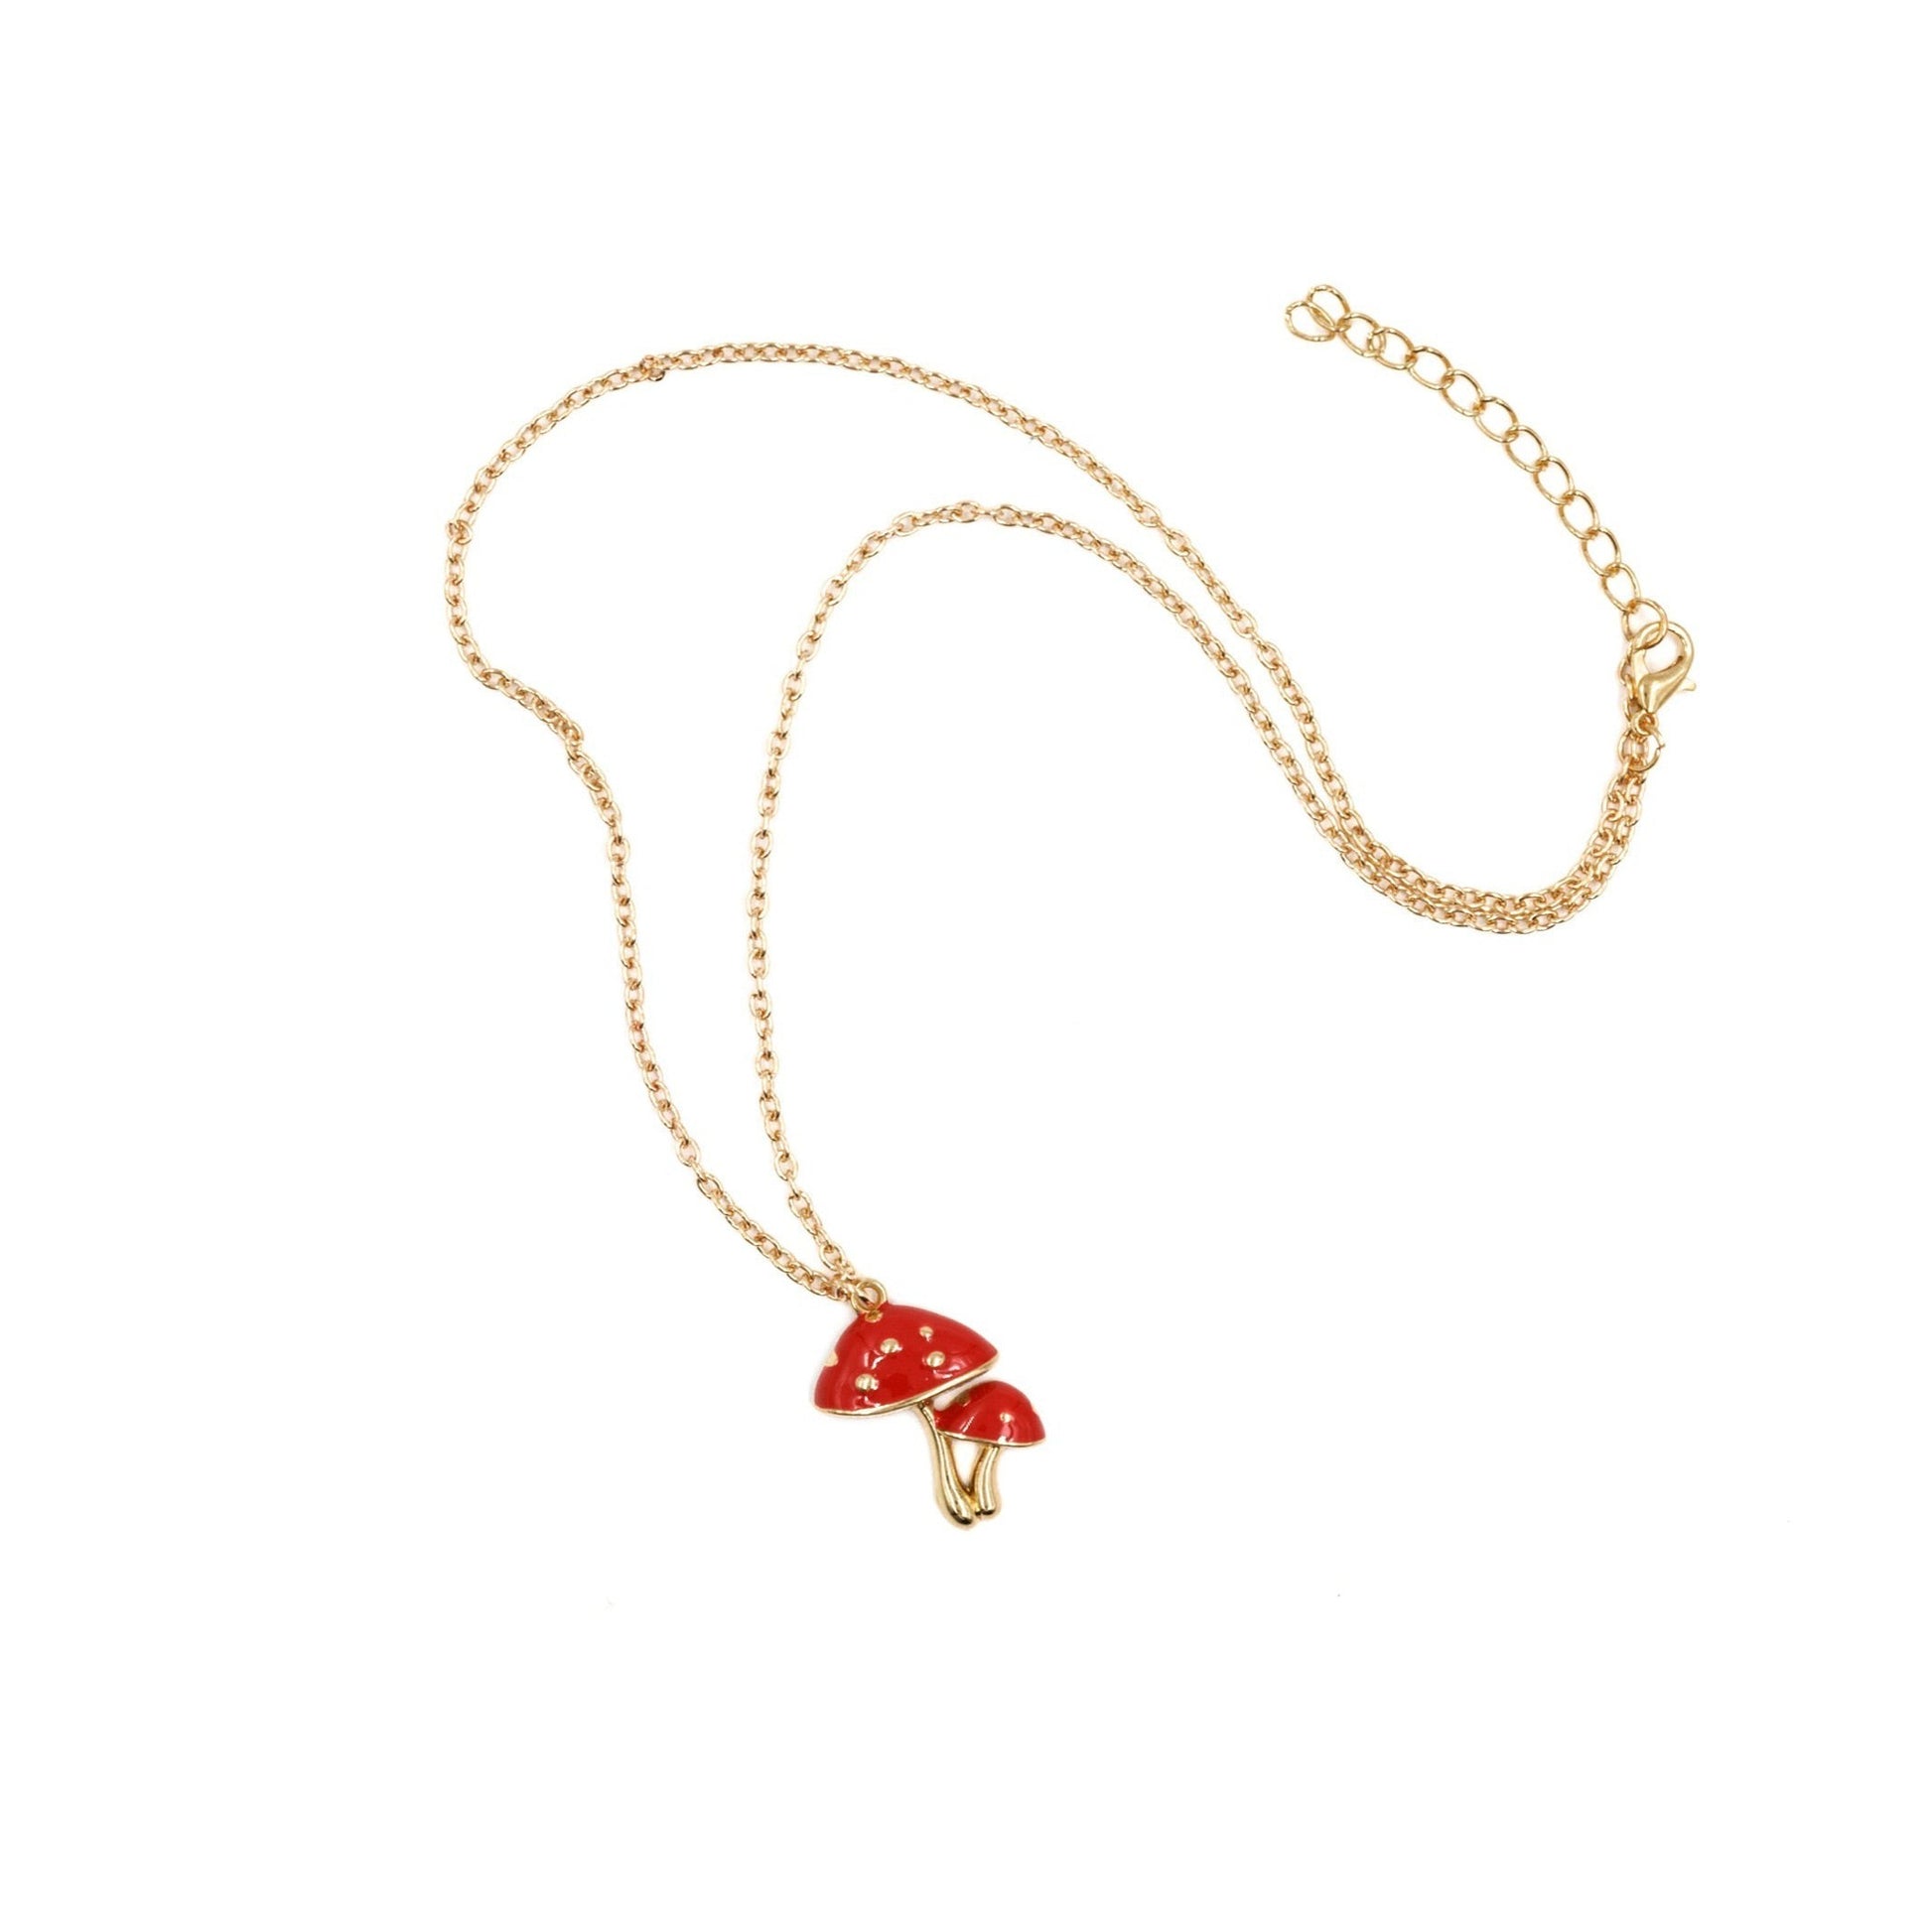 Forestcore Toadstool Mushroom Charm Necklace in Gold in a Gift Box